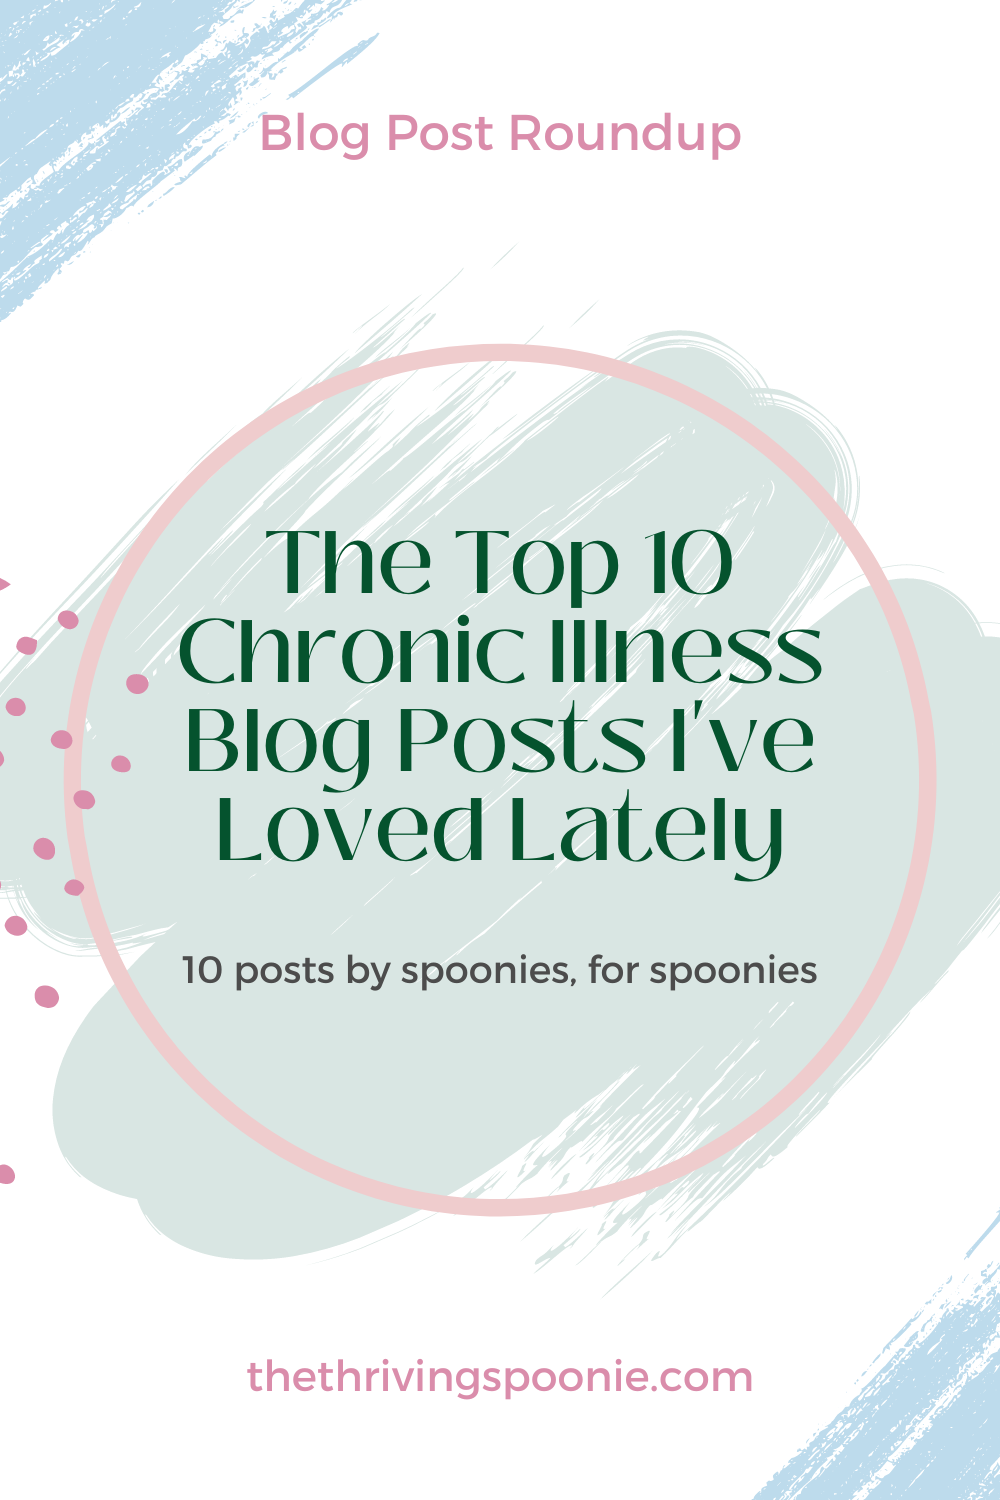 I’ve gathered the top 10 chronic illness blog posts I’ve loved lately right here - just for you! This is my way of creating community between my fellow spoonies, as well as other spoonie bloggers.